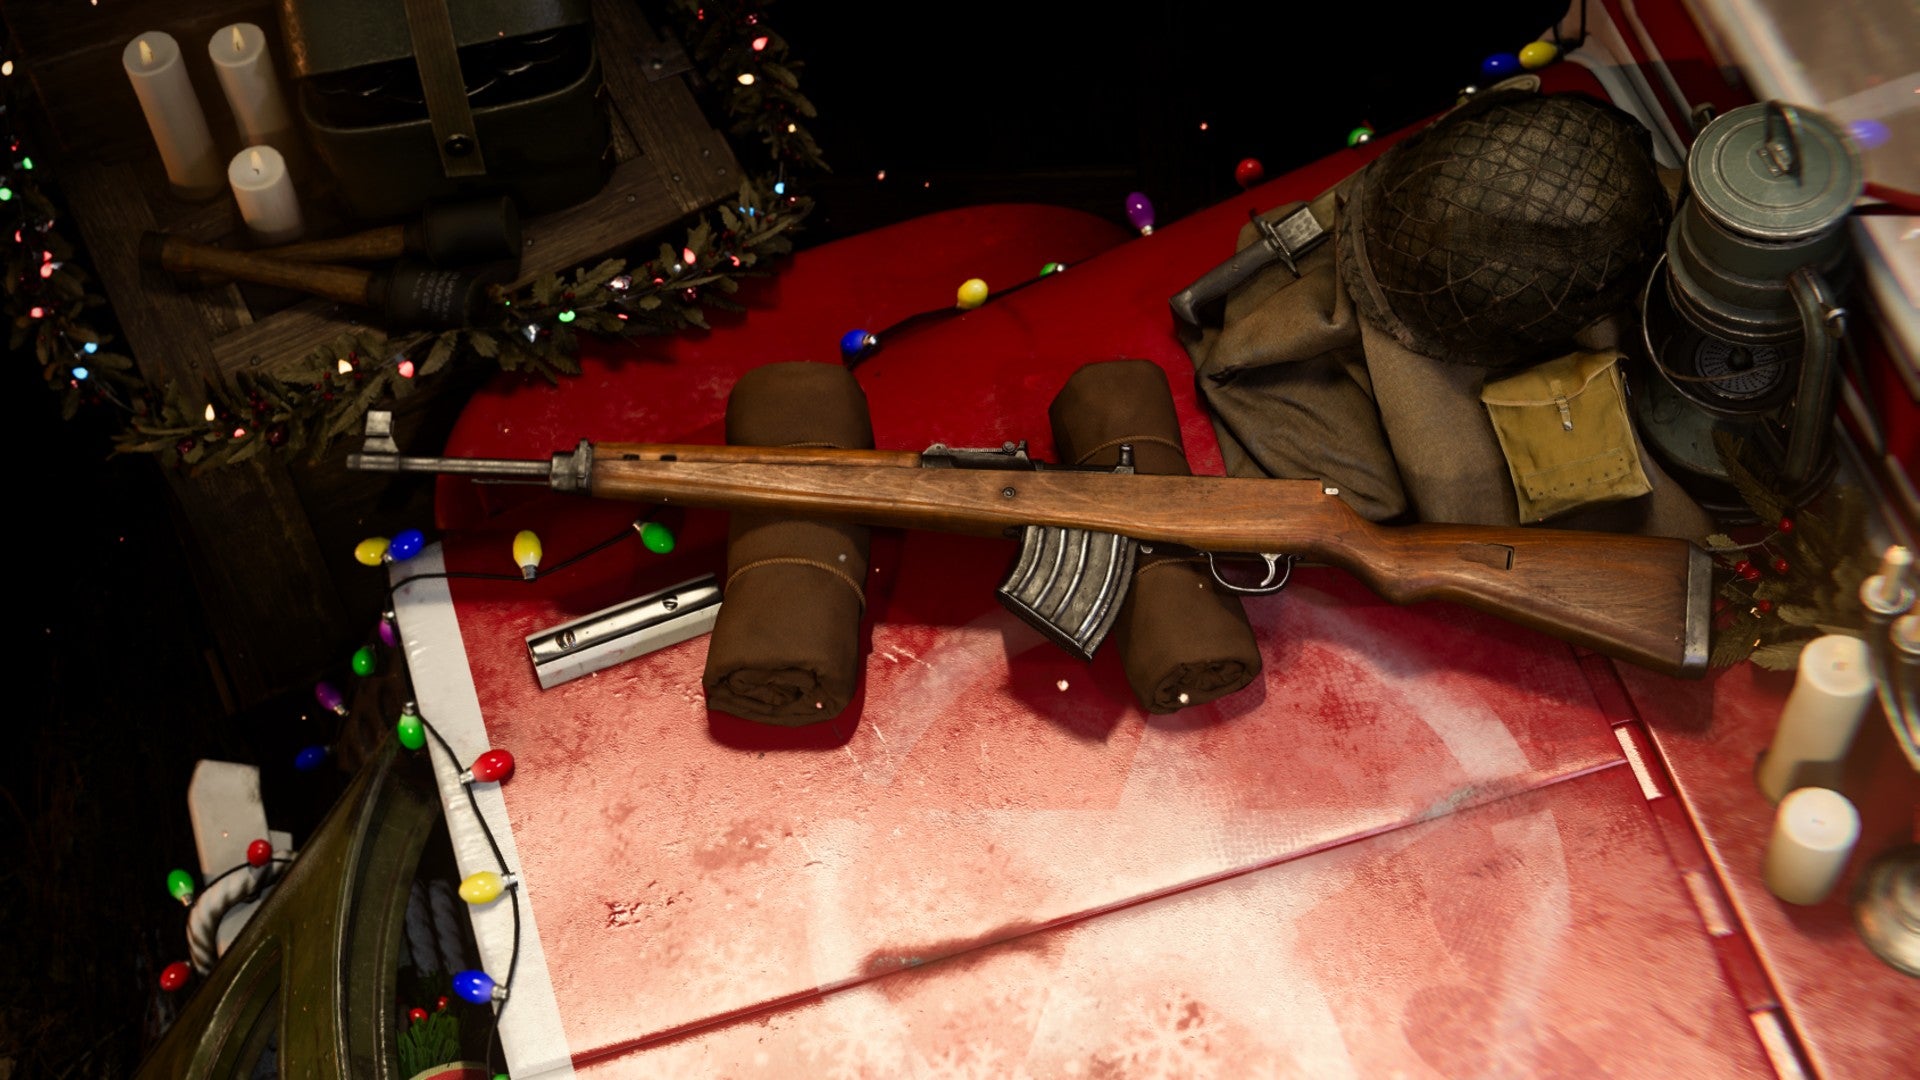 G43 Marksman Rifle in the Vanguard loadout screen. On a crate surrounded by Christmas decorations and lights.